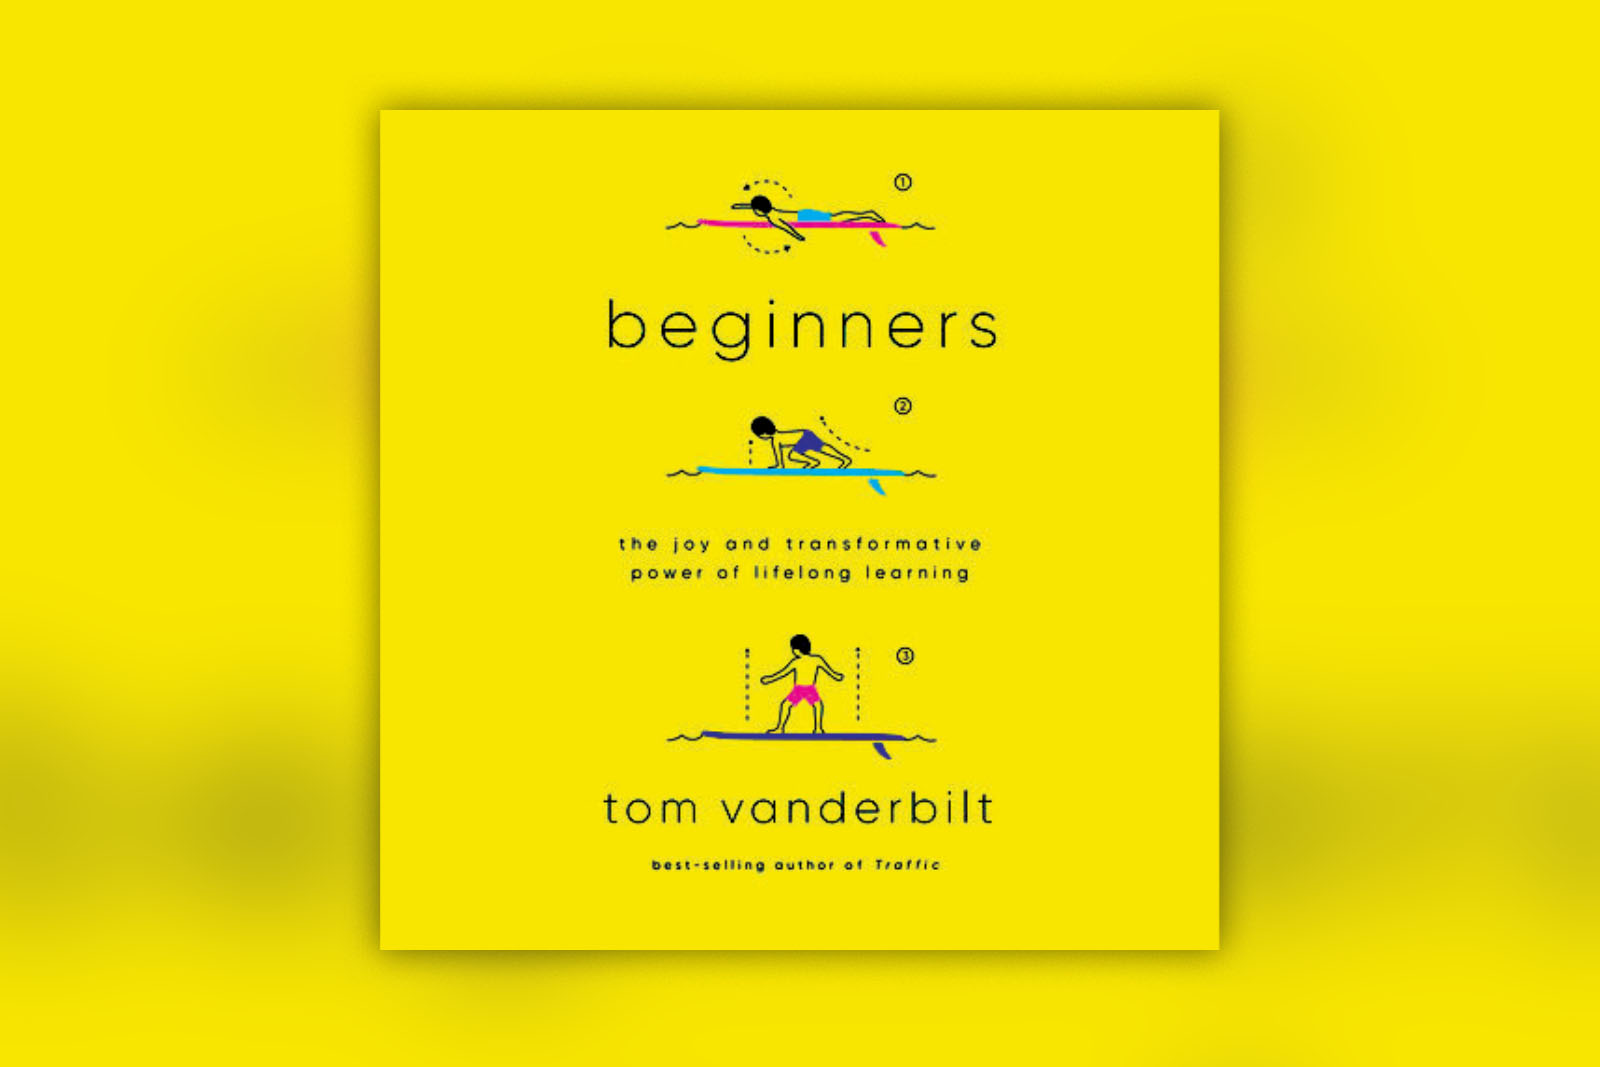 Beginners book cover